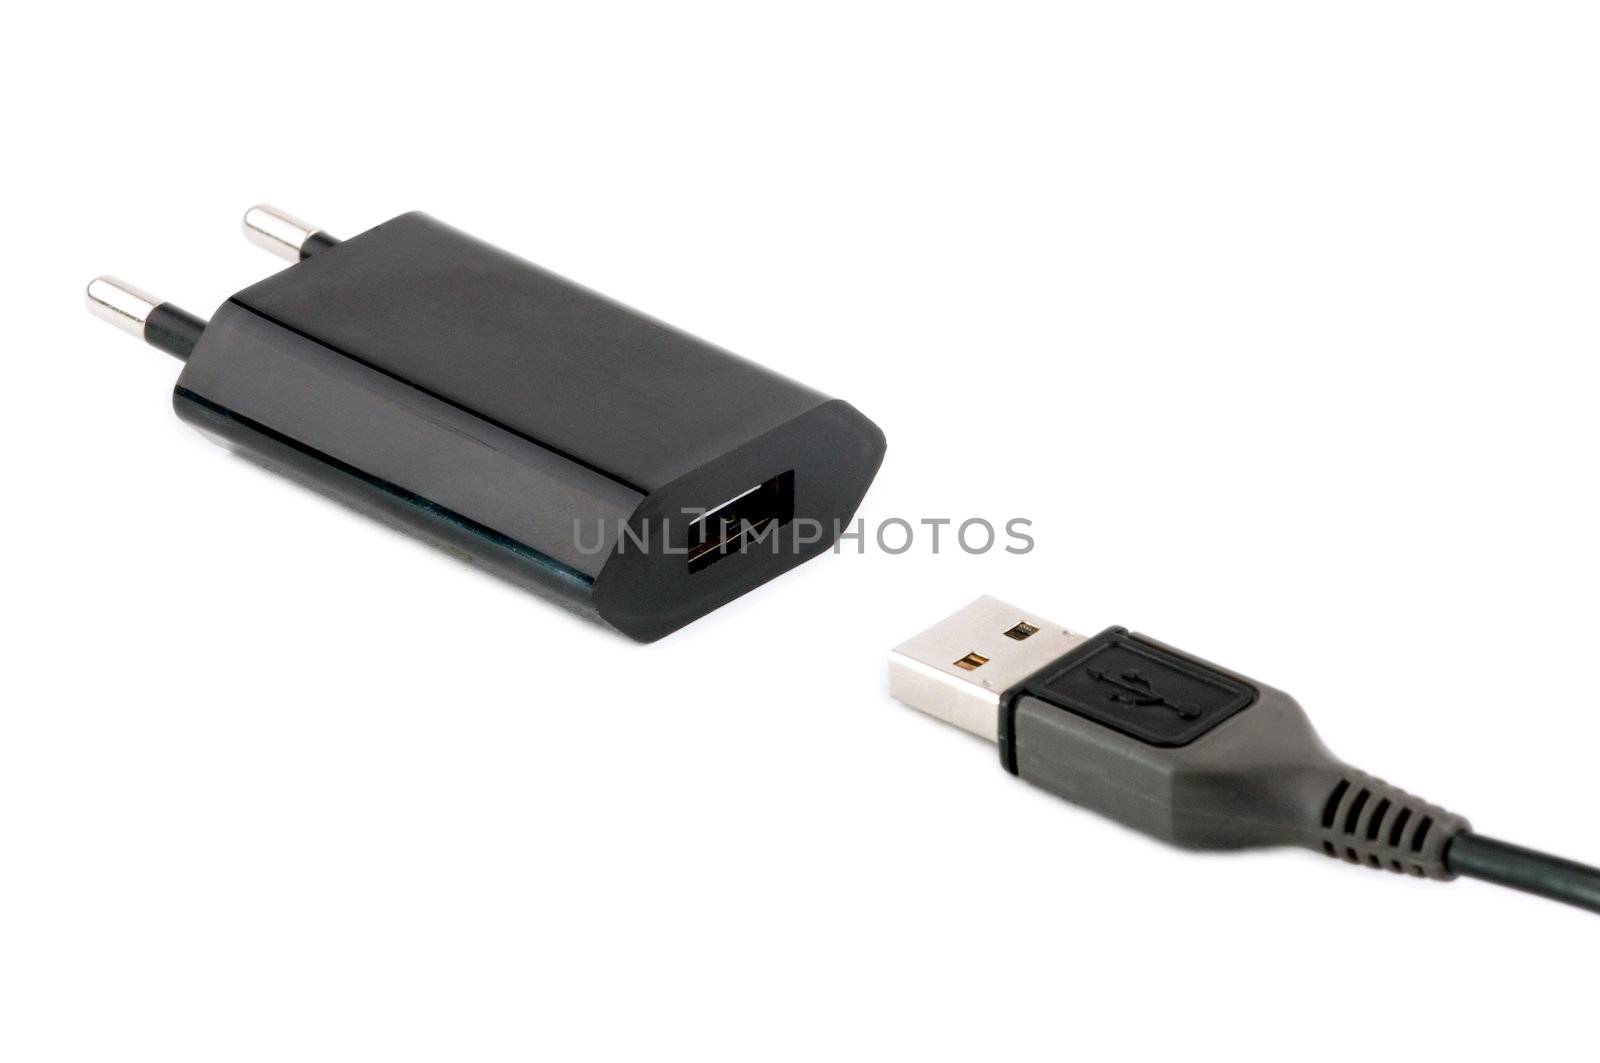 Black USB charger device with USB cable isolated on white